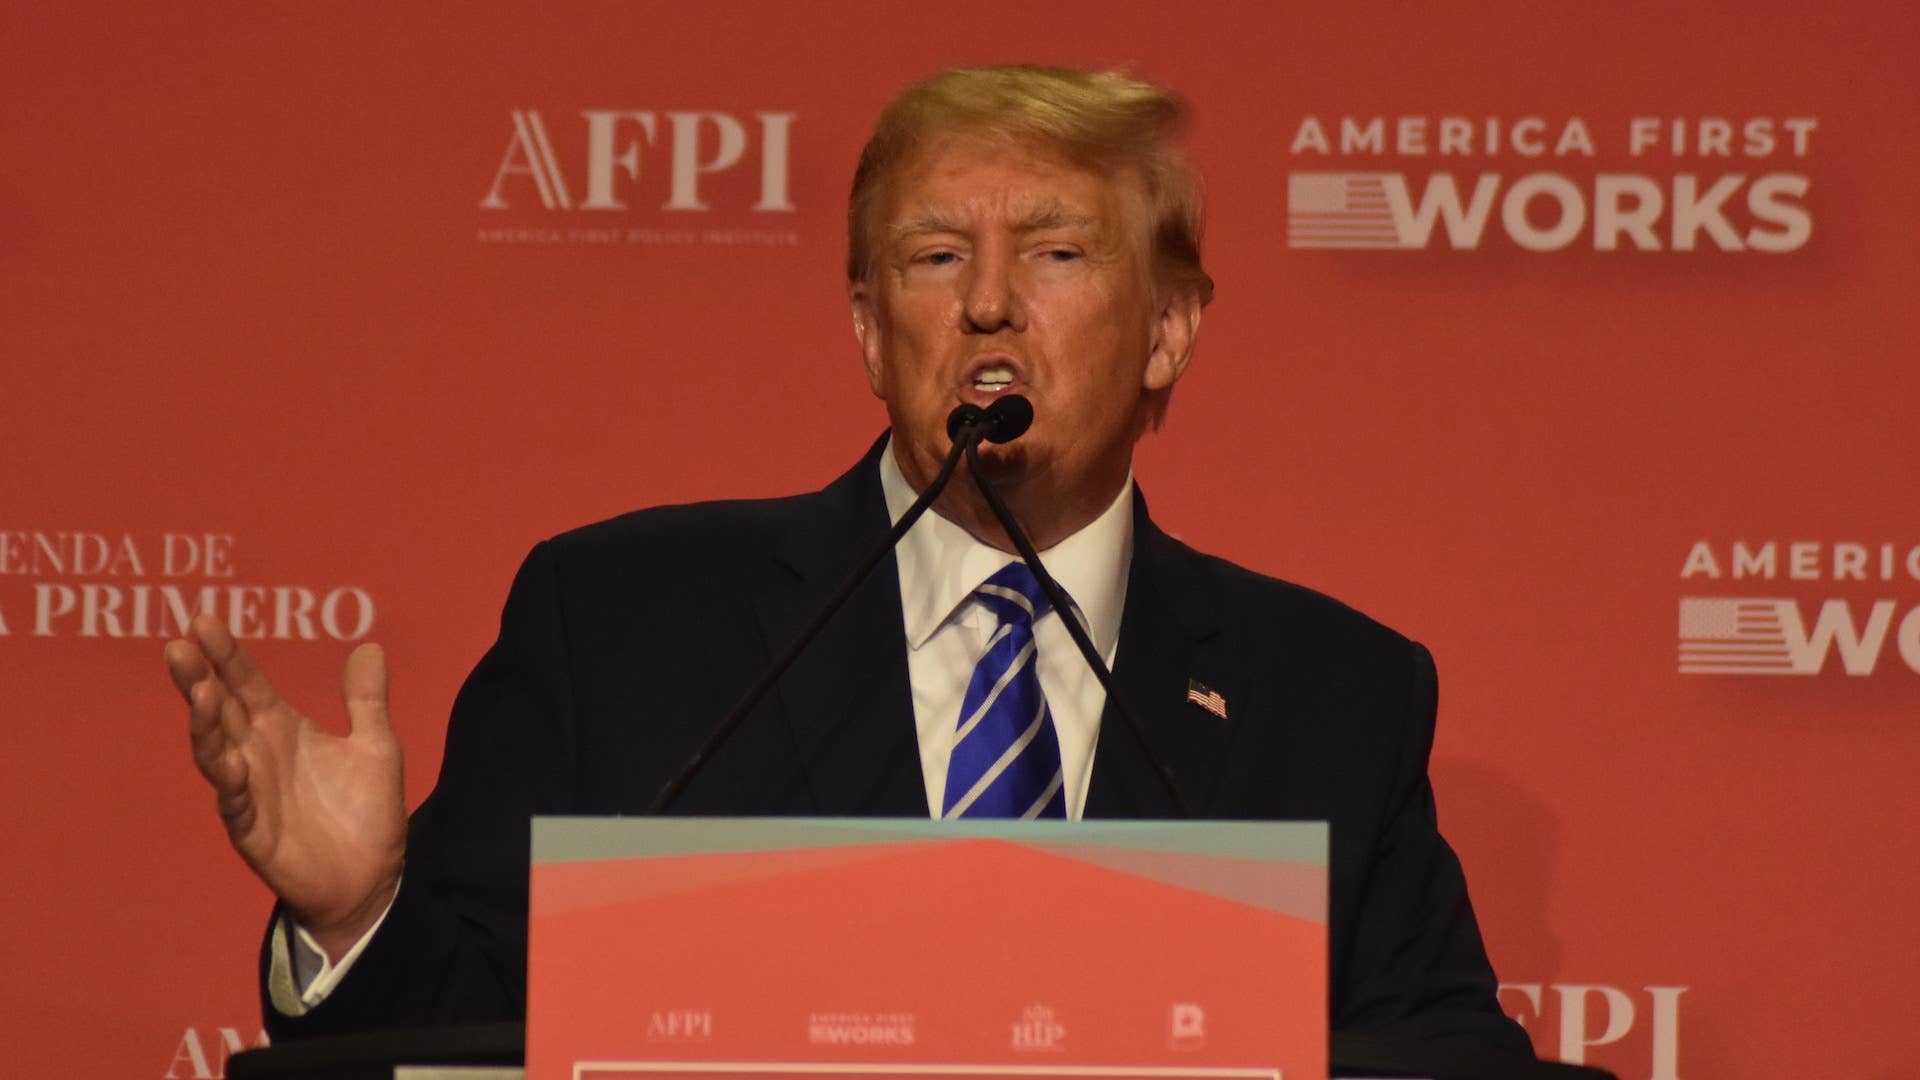 Former US President Donald Trump makes a speech at the 2022 Hispanic Leadership Conference